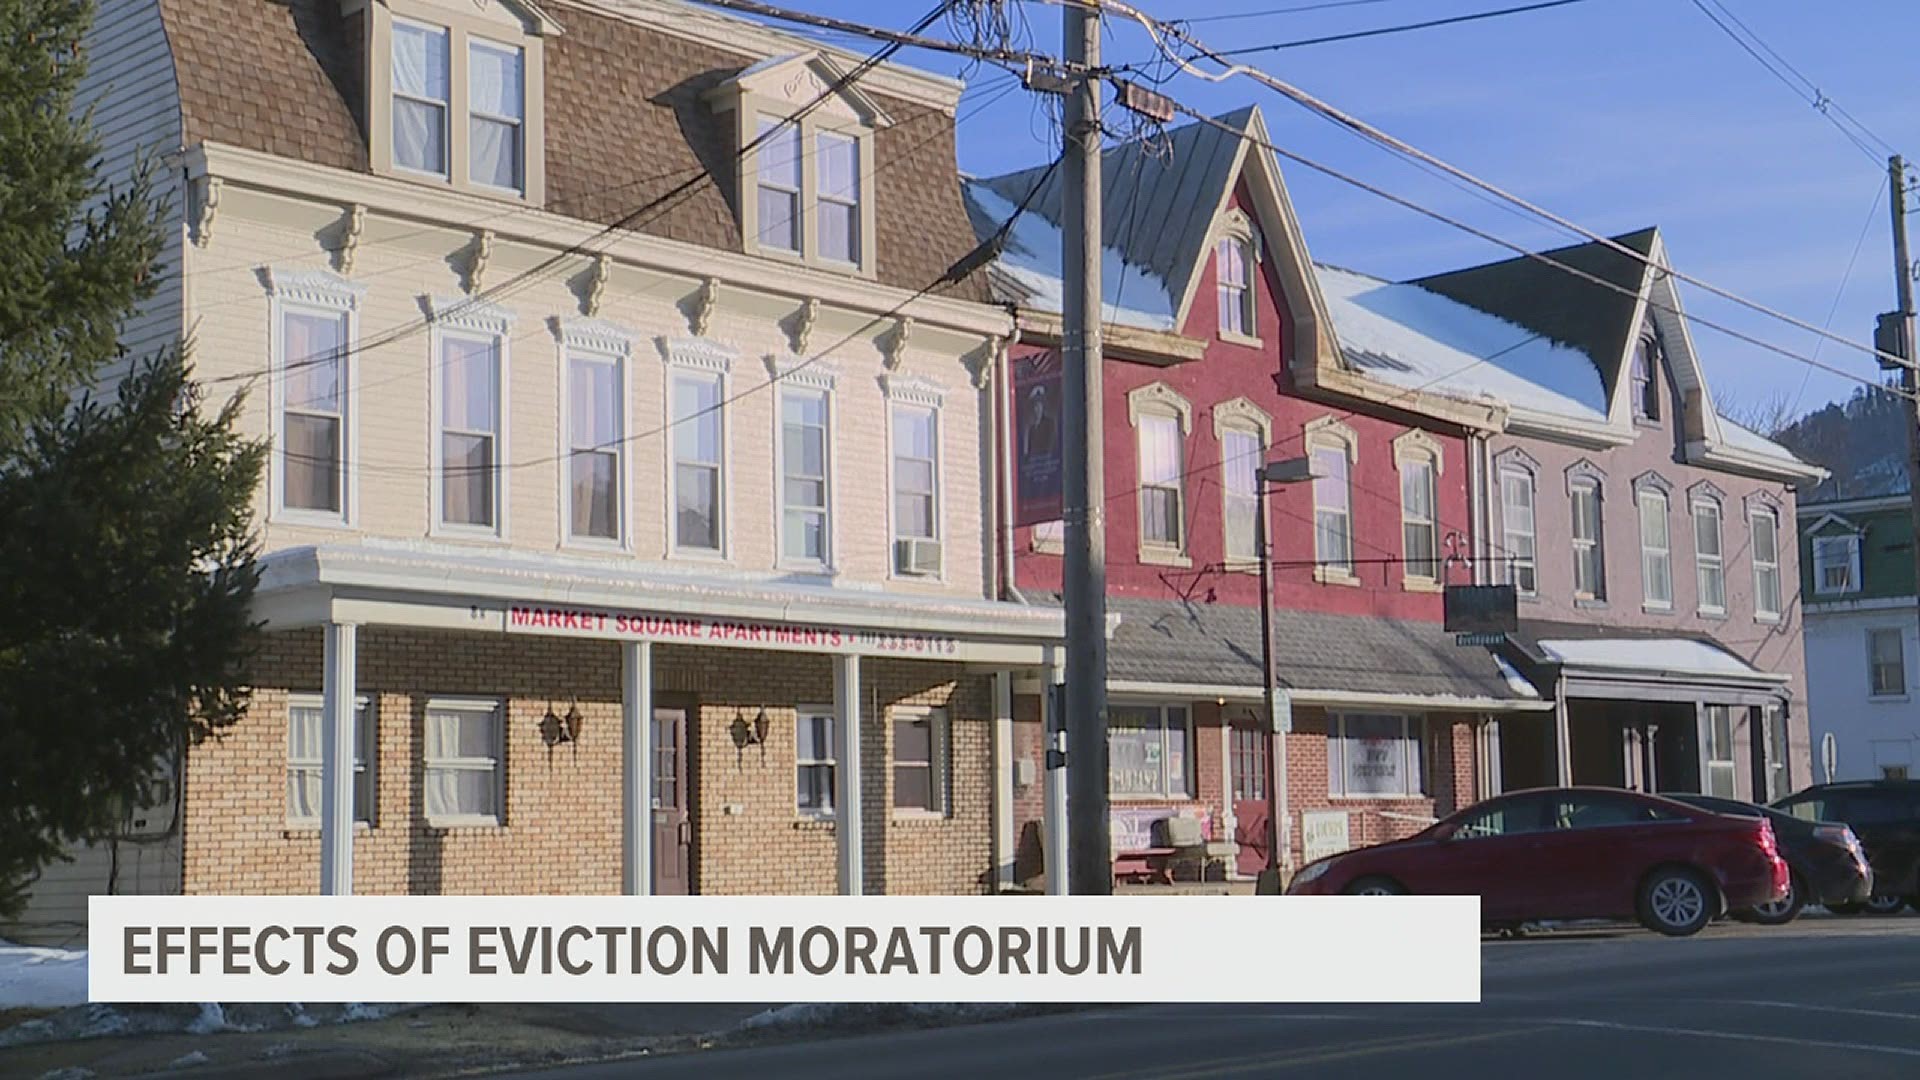 The CDC issued a national moratorium on evictions through March 31. Some landlords, though, rely on rents pay their properties’ mortgage.